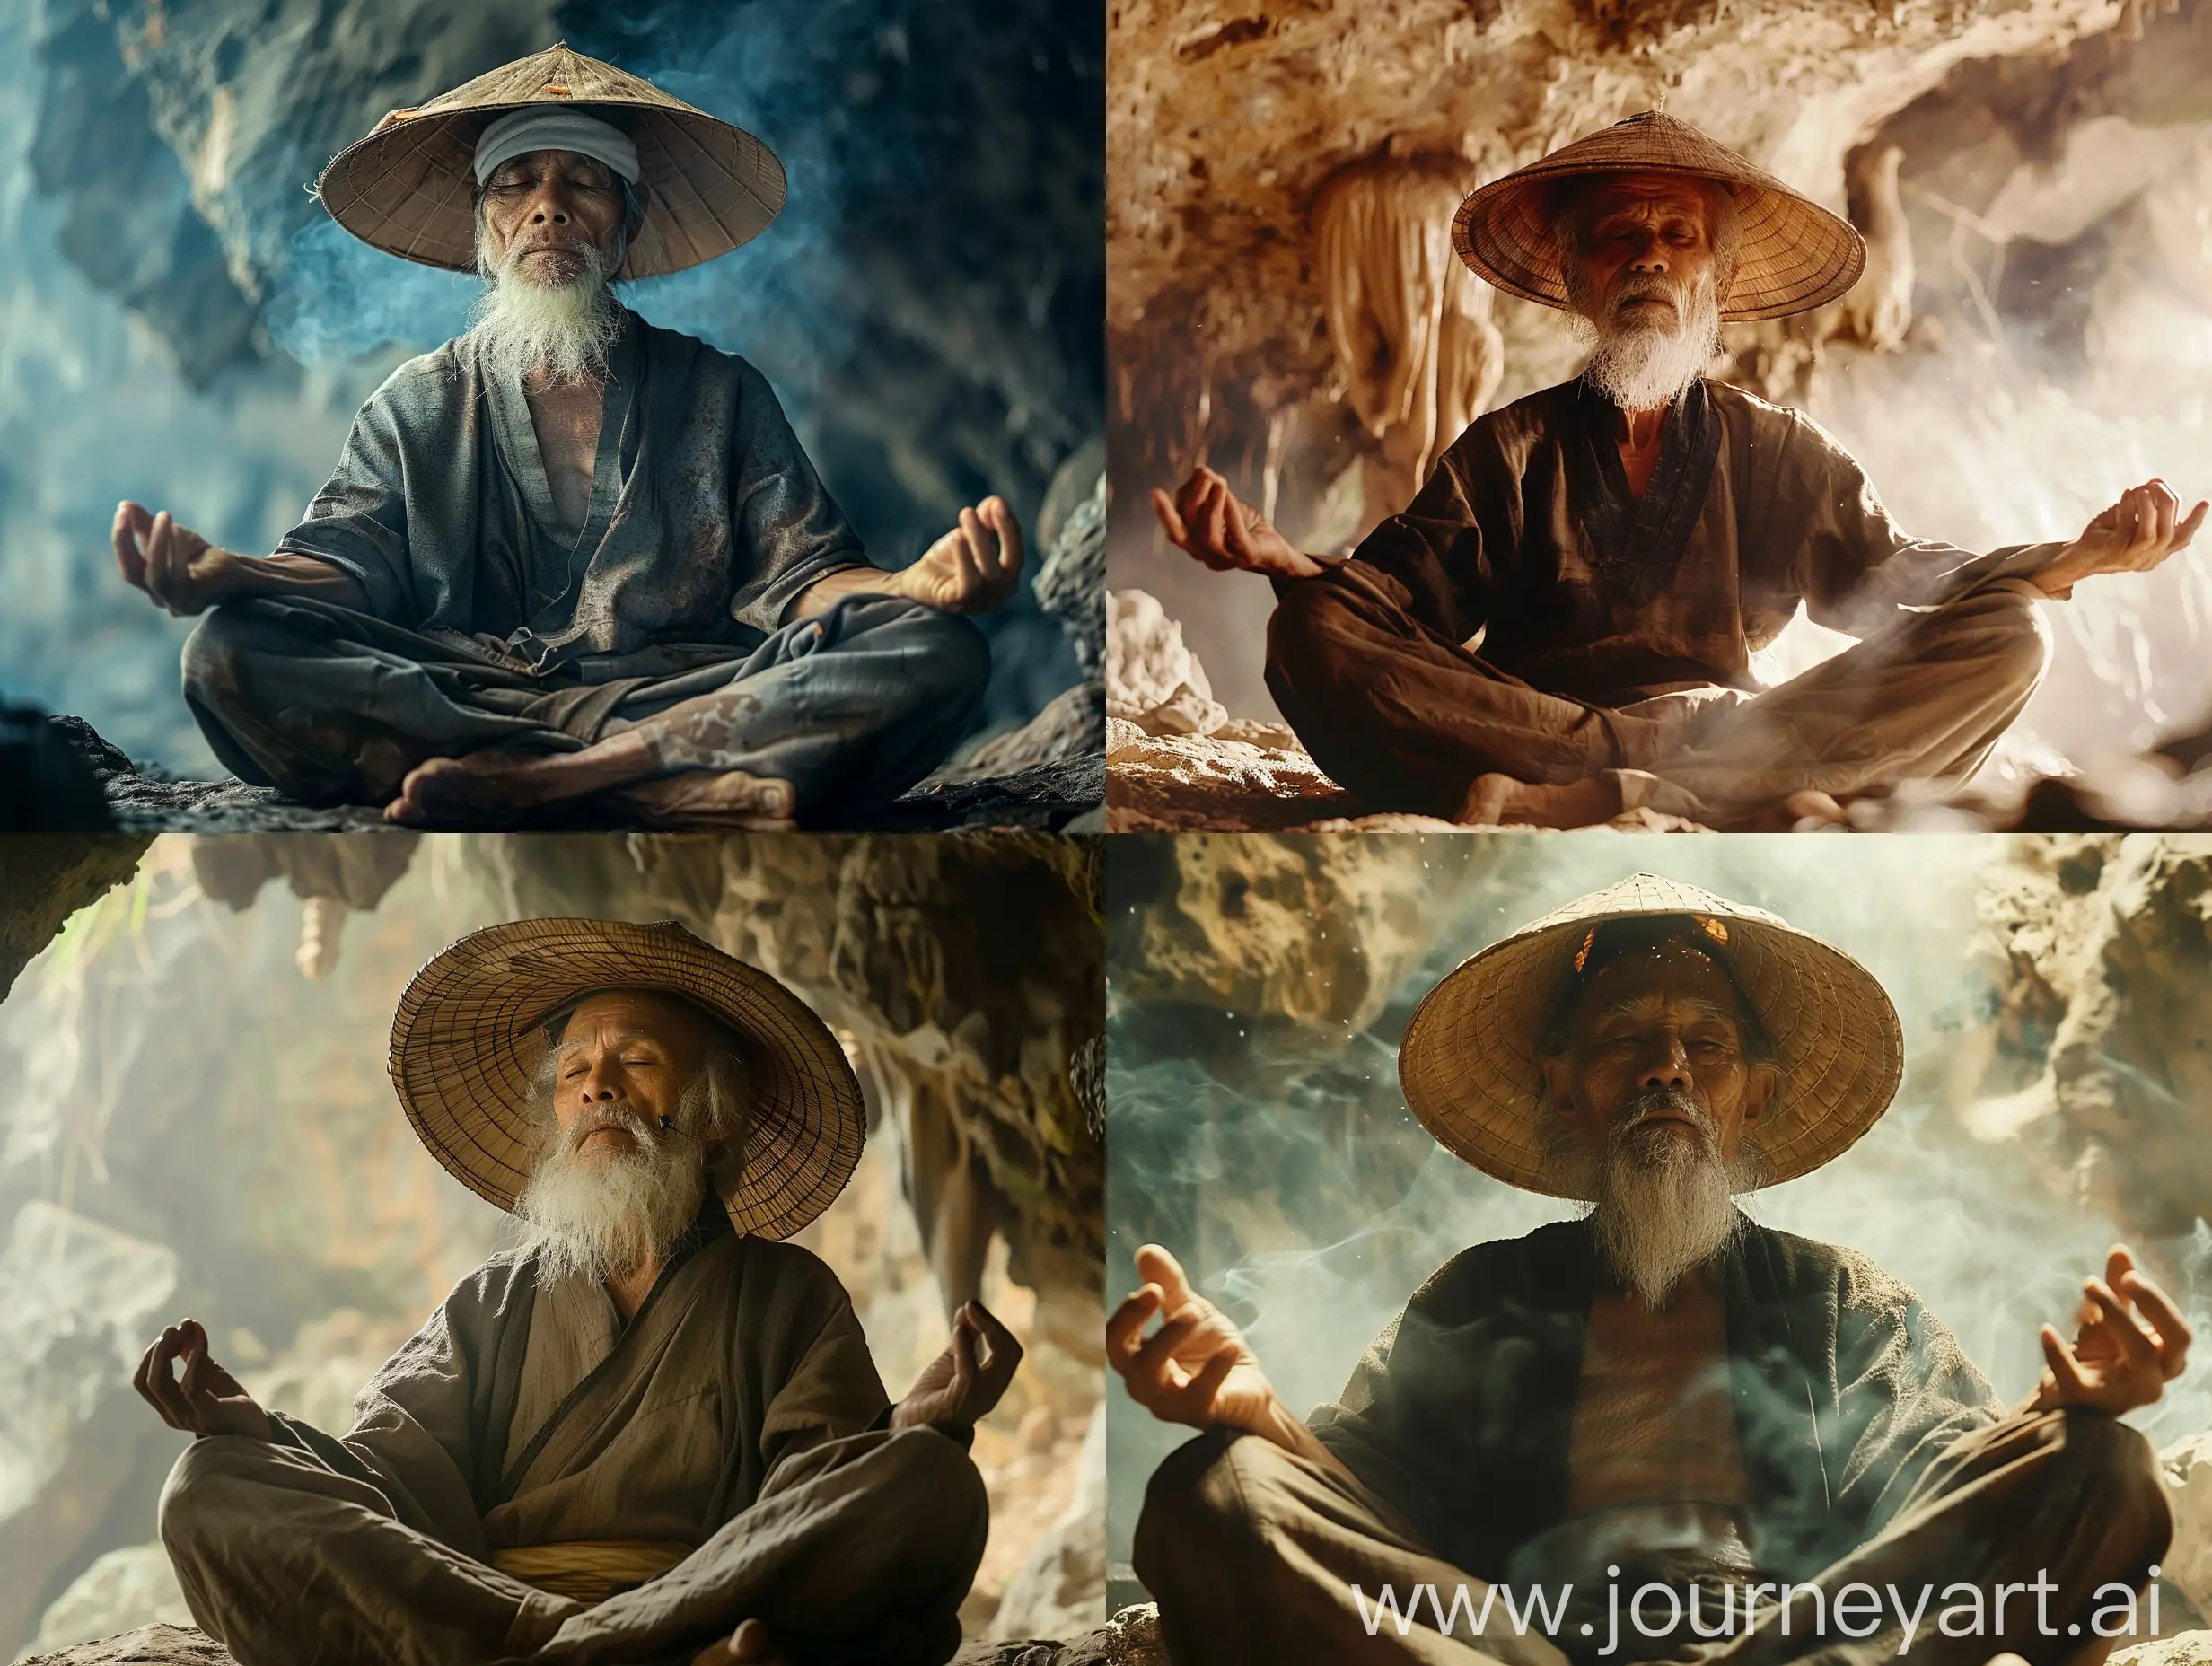 Indonesian-Royal-Cinematic-Film-Meditating-Old-Man-in-Cave